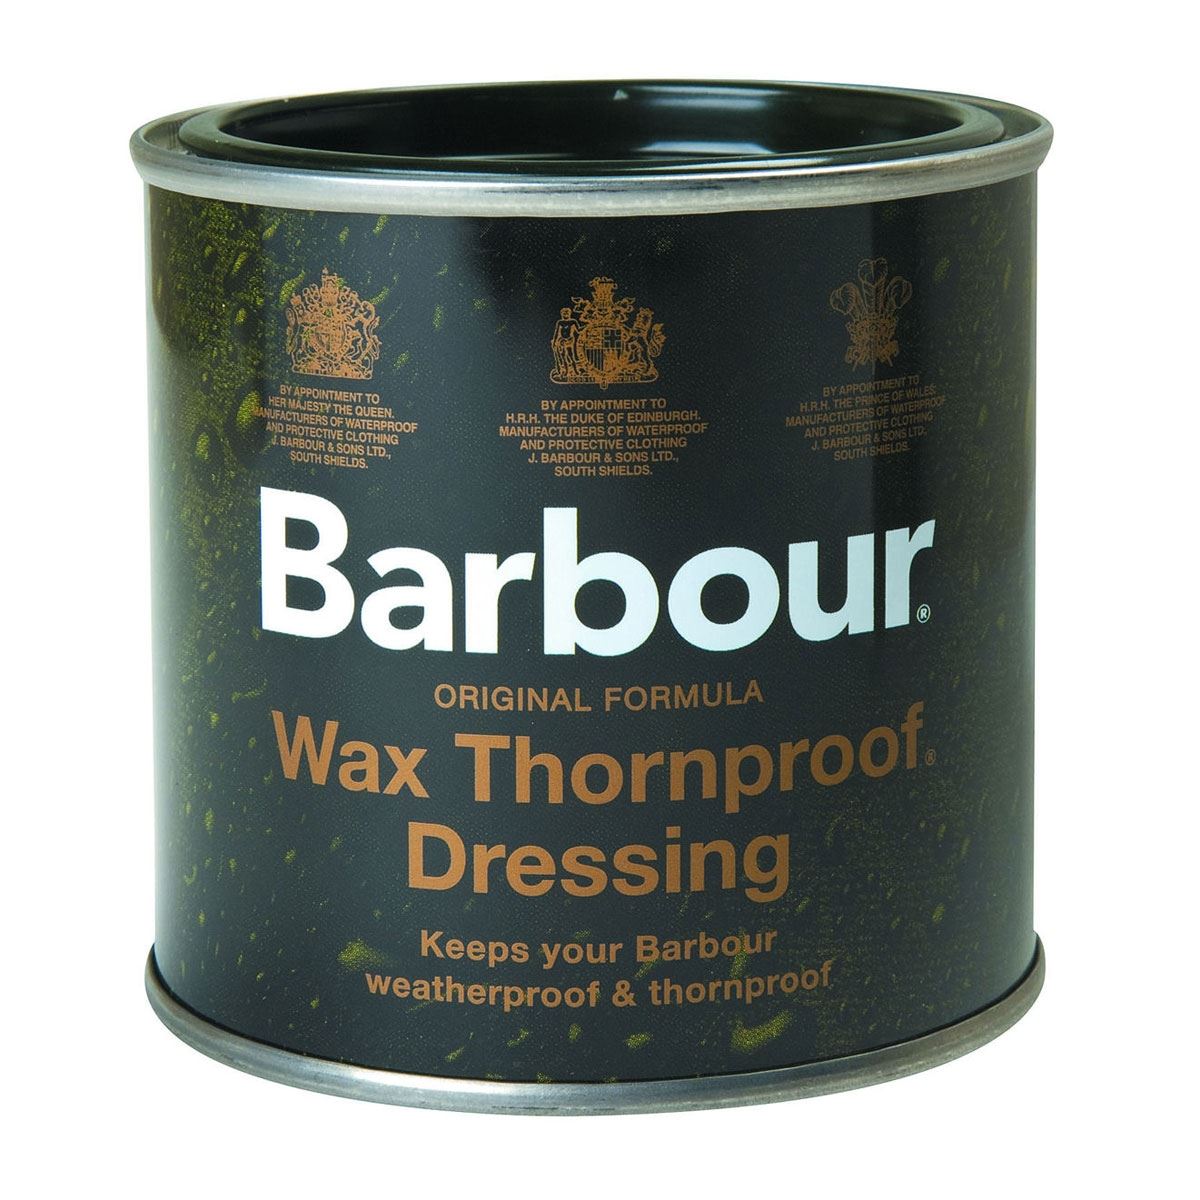 Any blog offering tips on using Barbour Wax for cleaning & rewaxing your jacket?